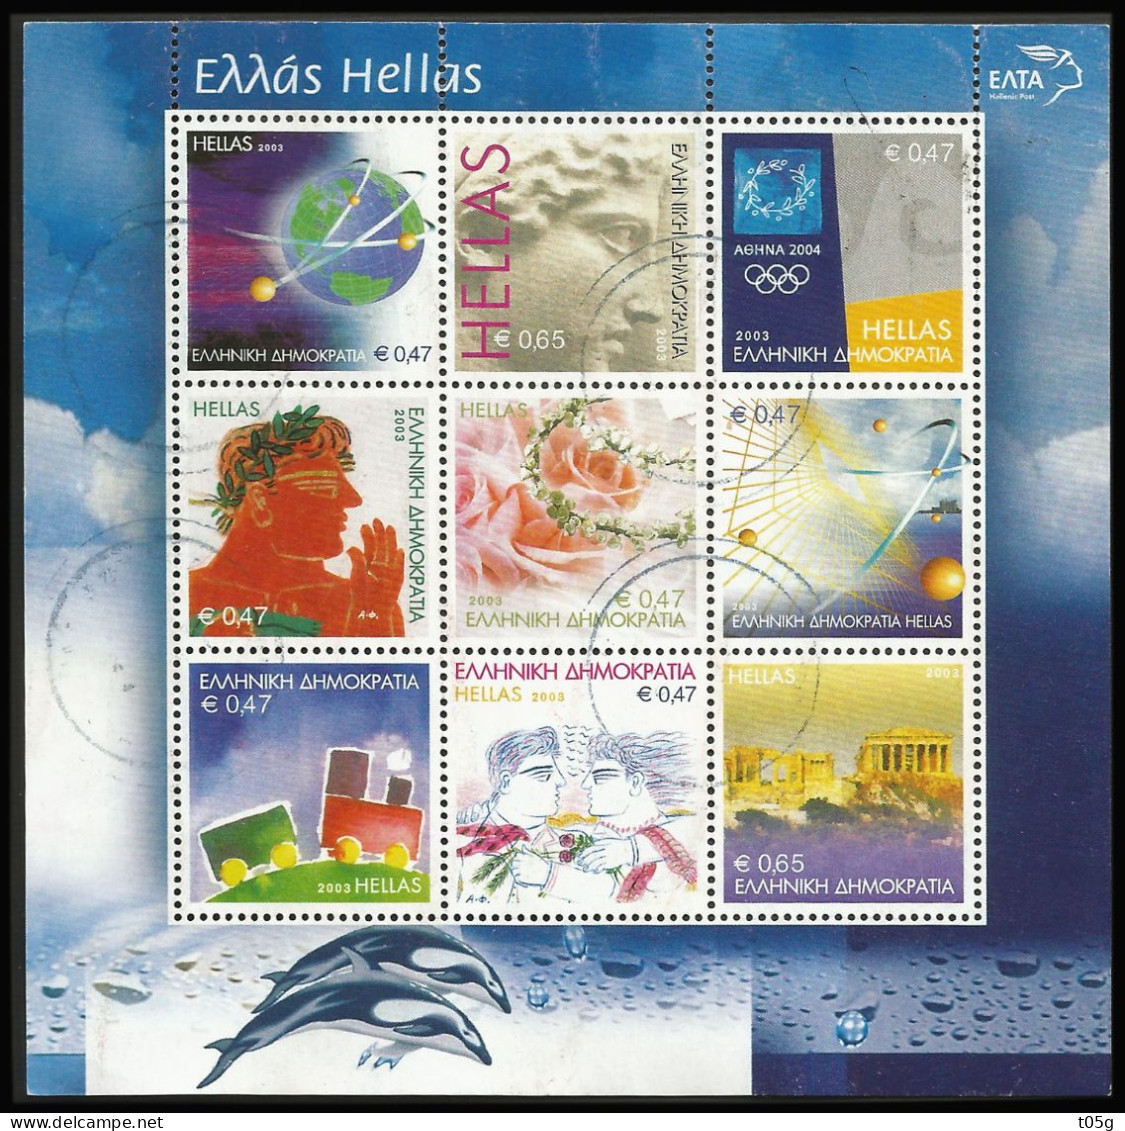 GREECE- GRECE - HELLAS 2003: Special Set Personal Stamps Sheetlet used - Usati